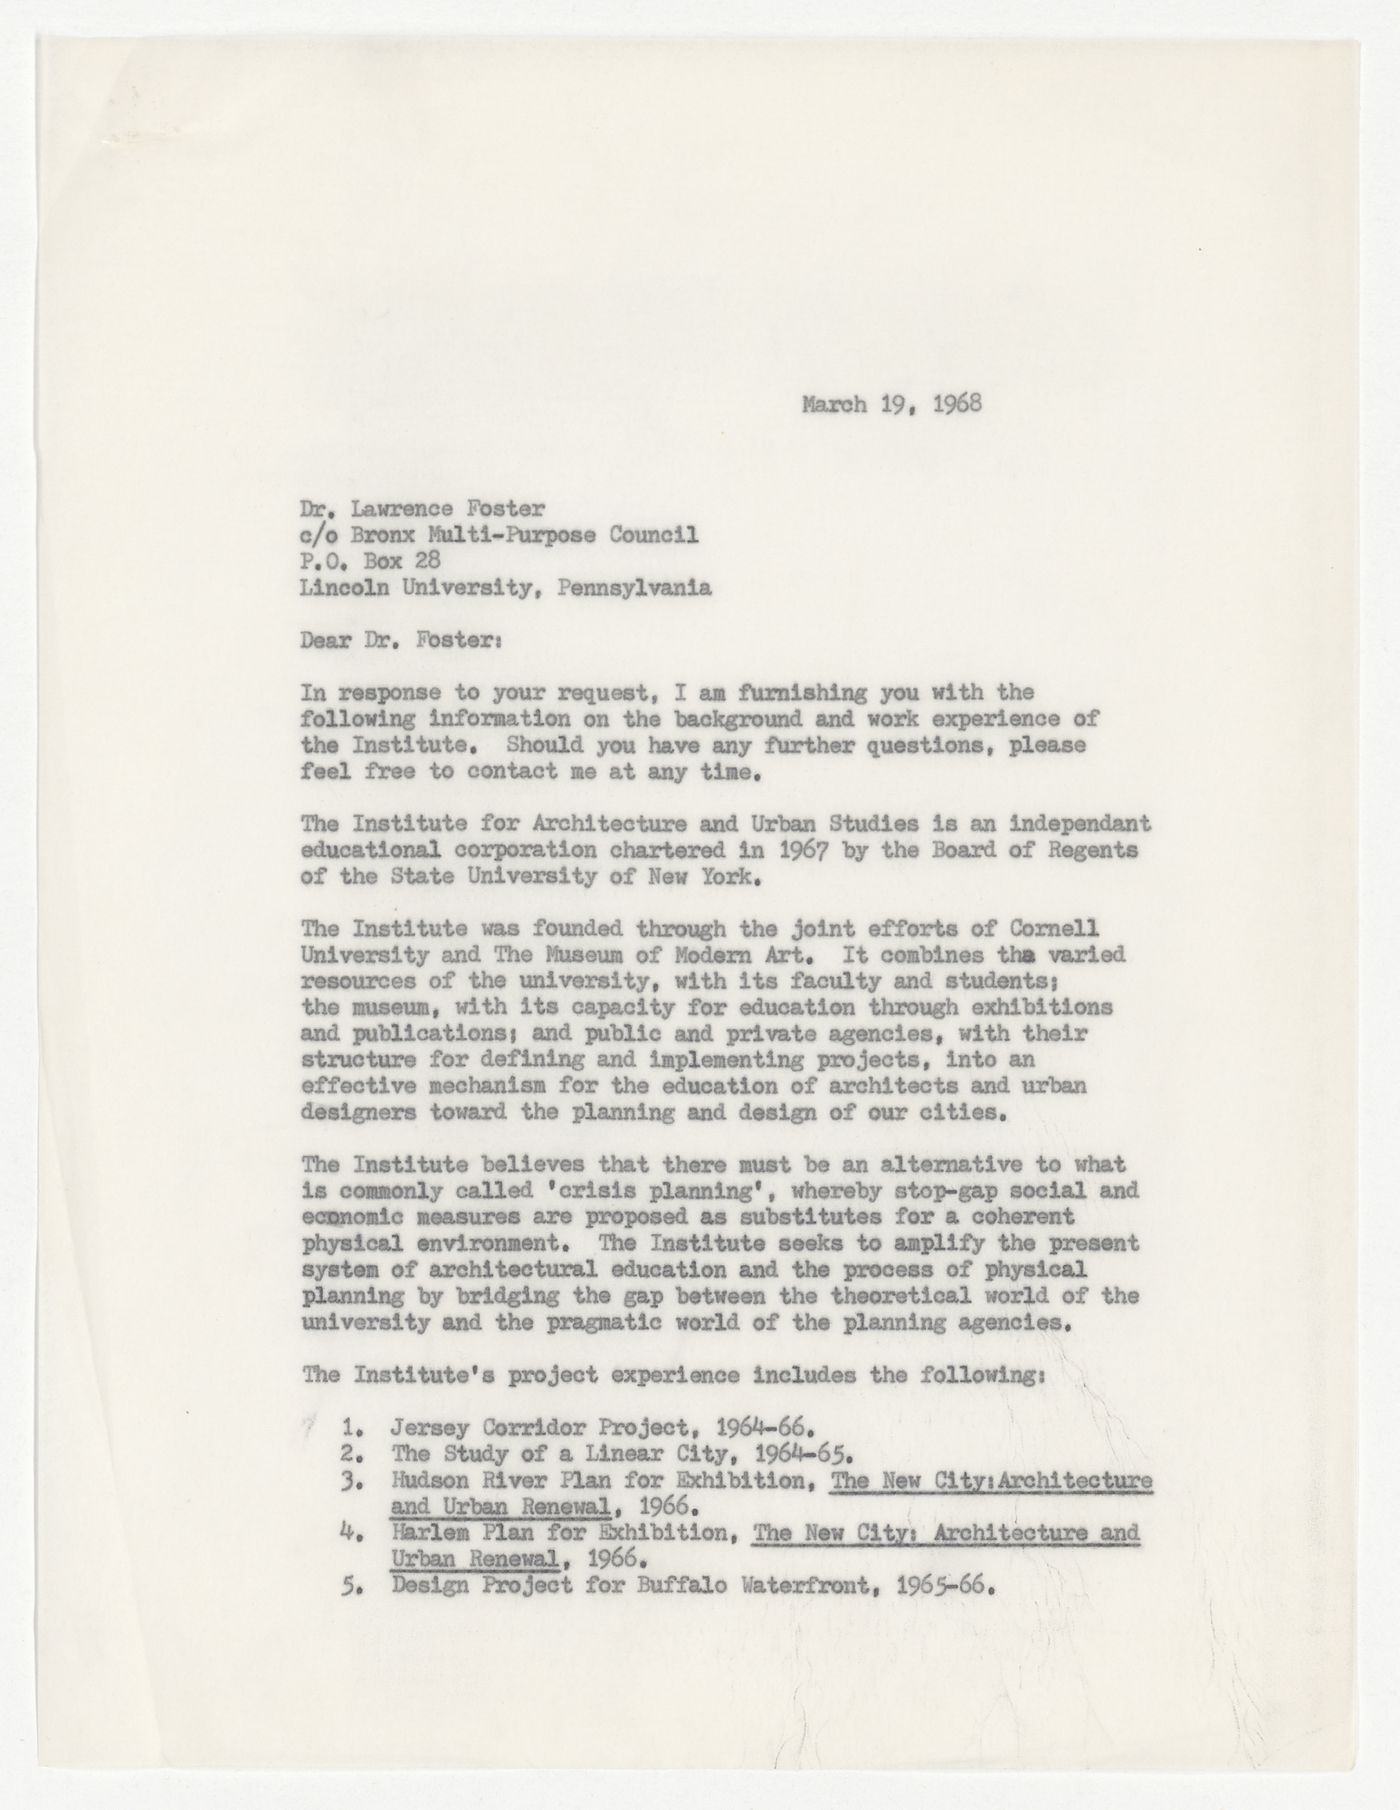 Letter from Peter D. Eisenman to Lawrence Foster about the background and work experience of IAUS